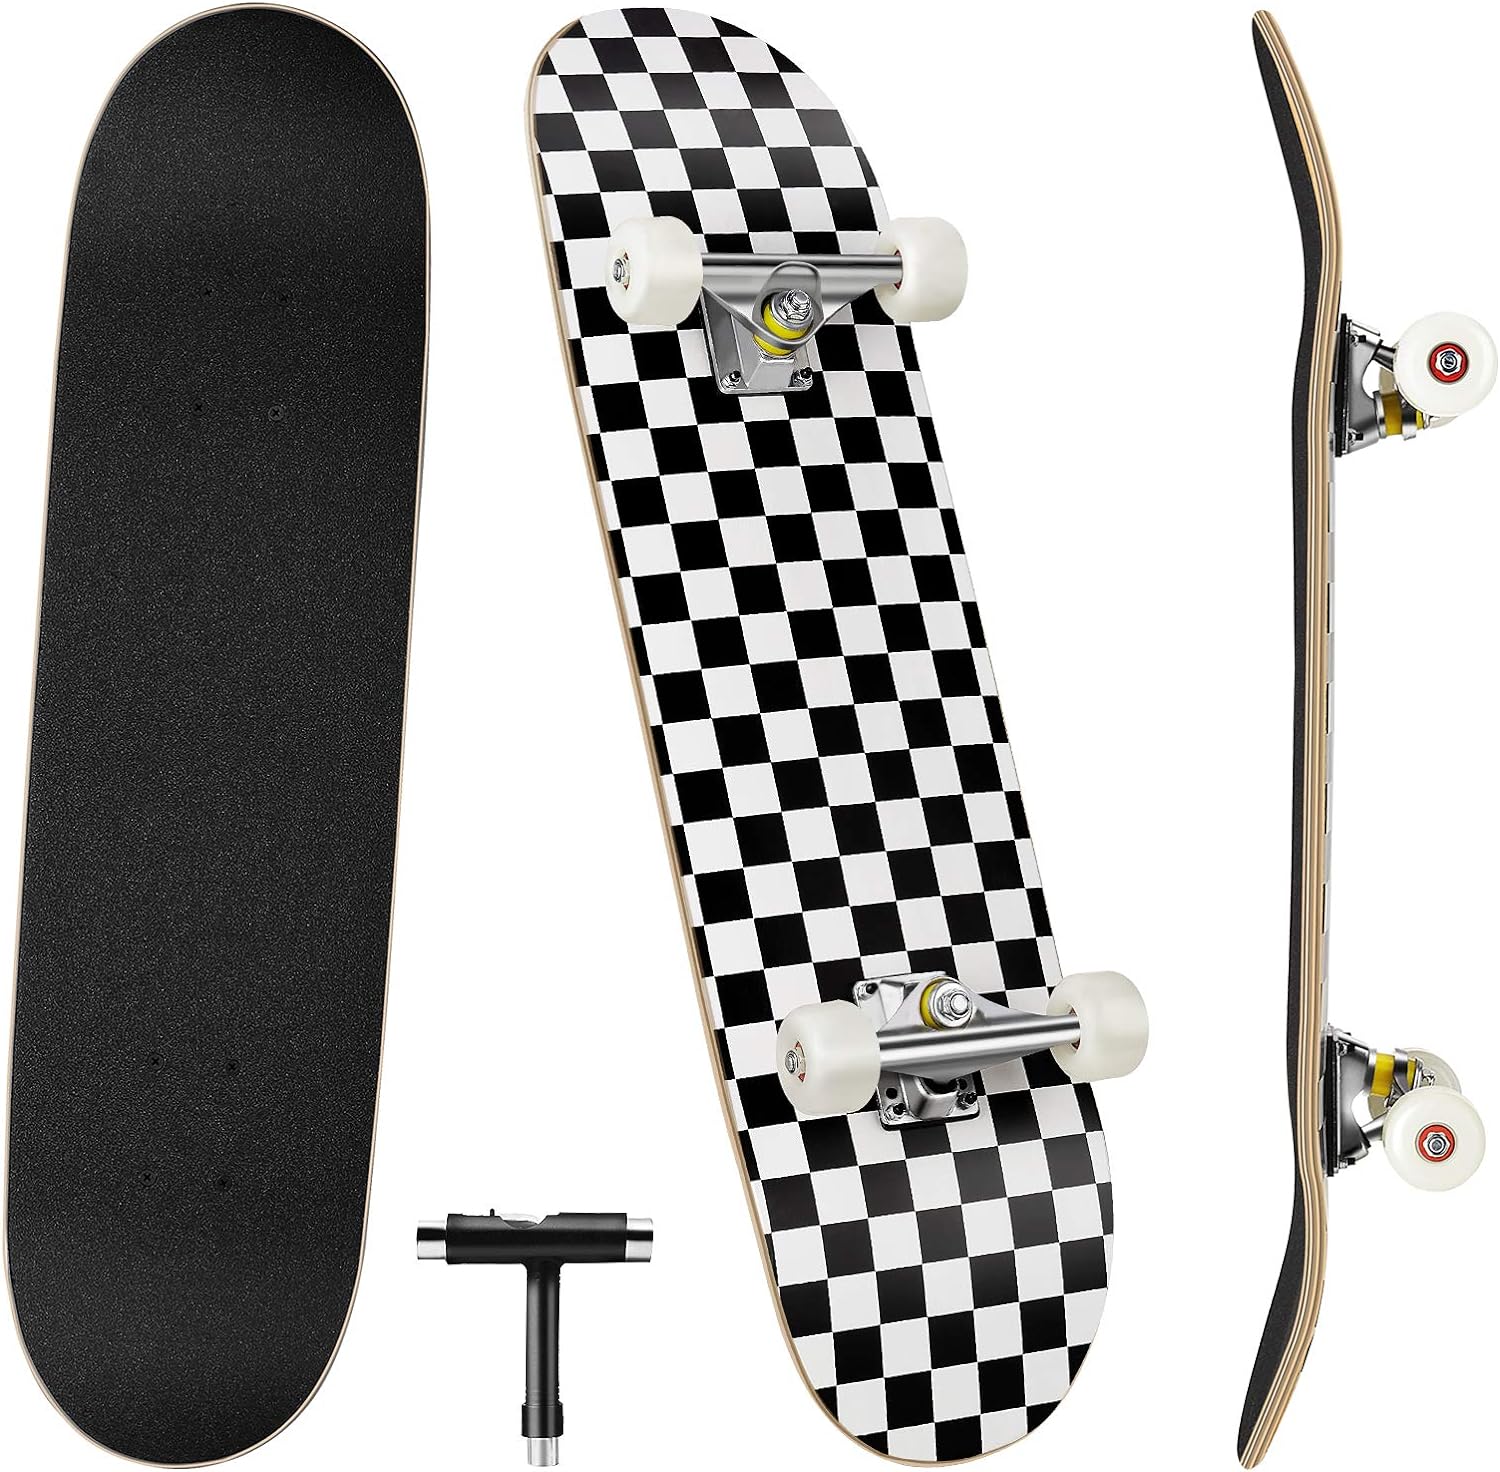 Details about   Skateboards for Beginners 7 Layer Canadian B 91 Complete Skateboard 31 x 8 